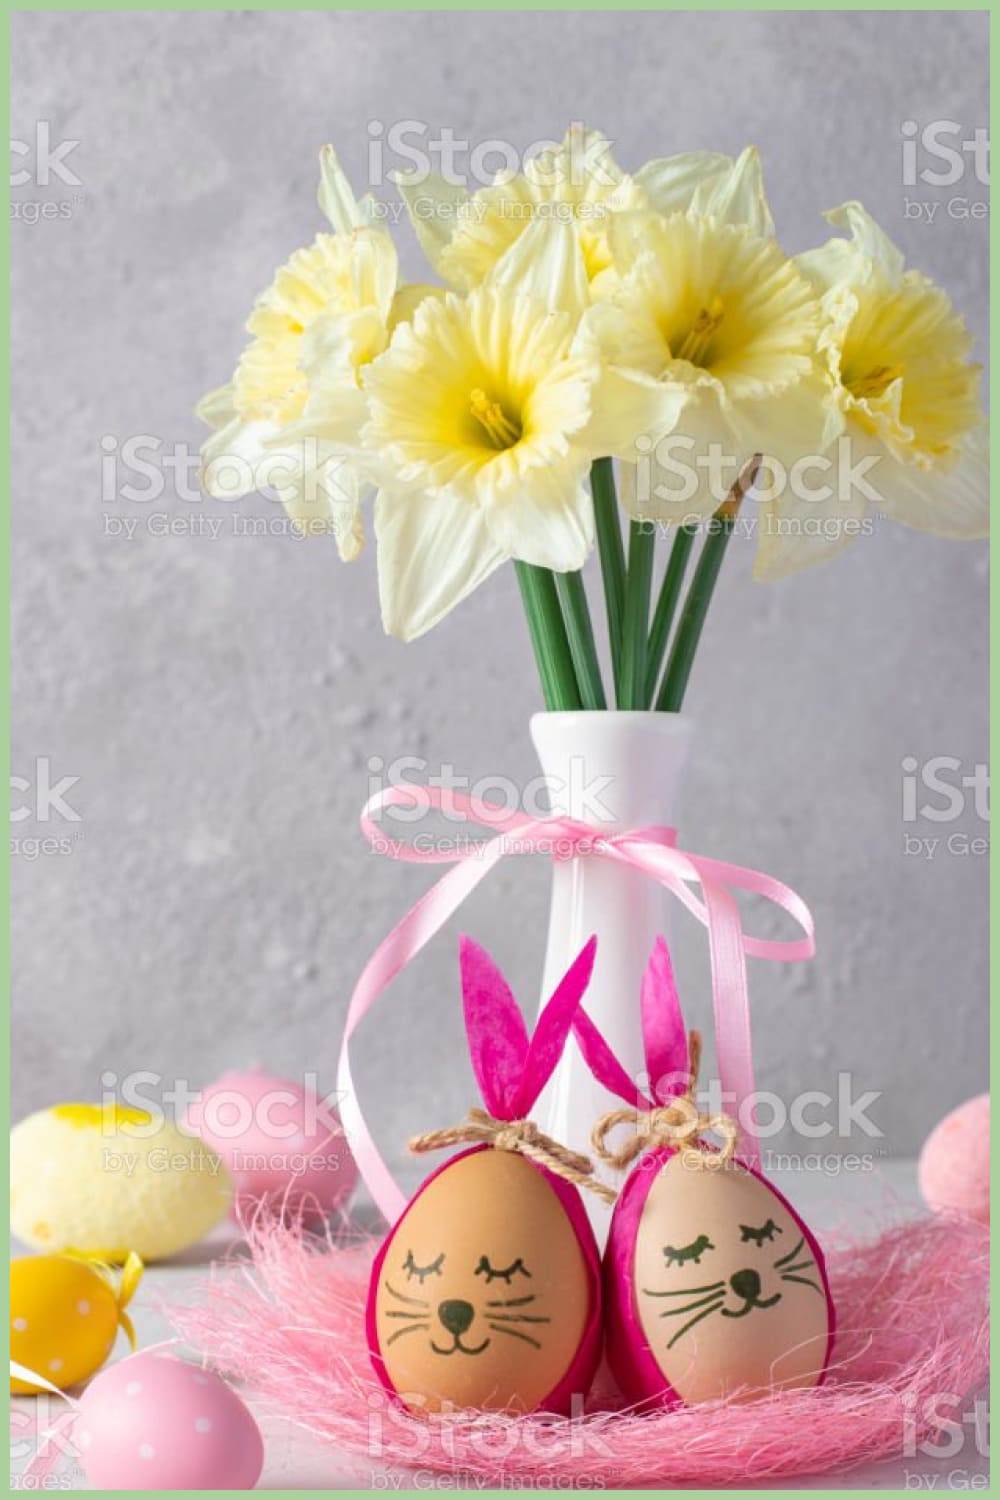 Easter bunnies made of eggs with multi-colored ears made of colored paper or napkins and daffodils in a vase.